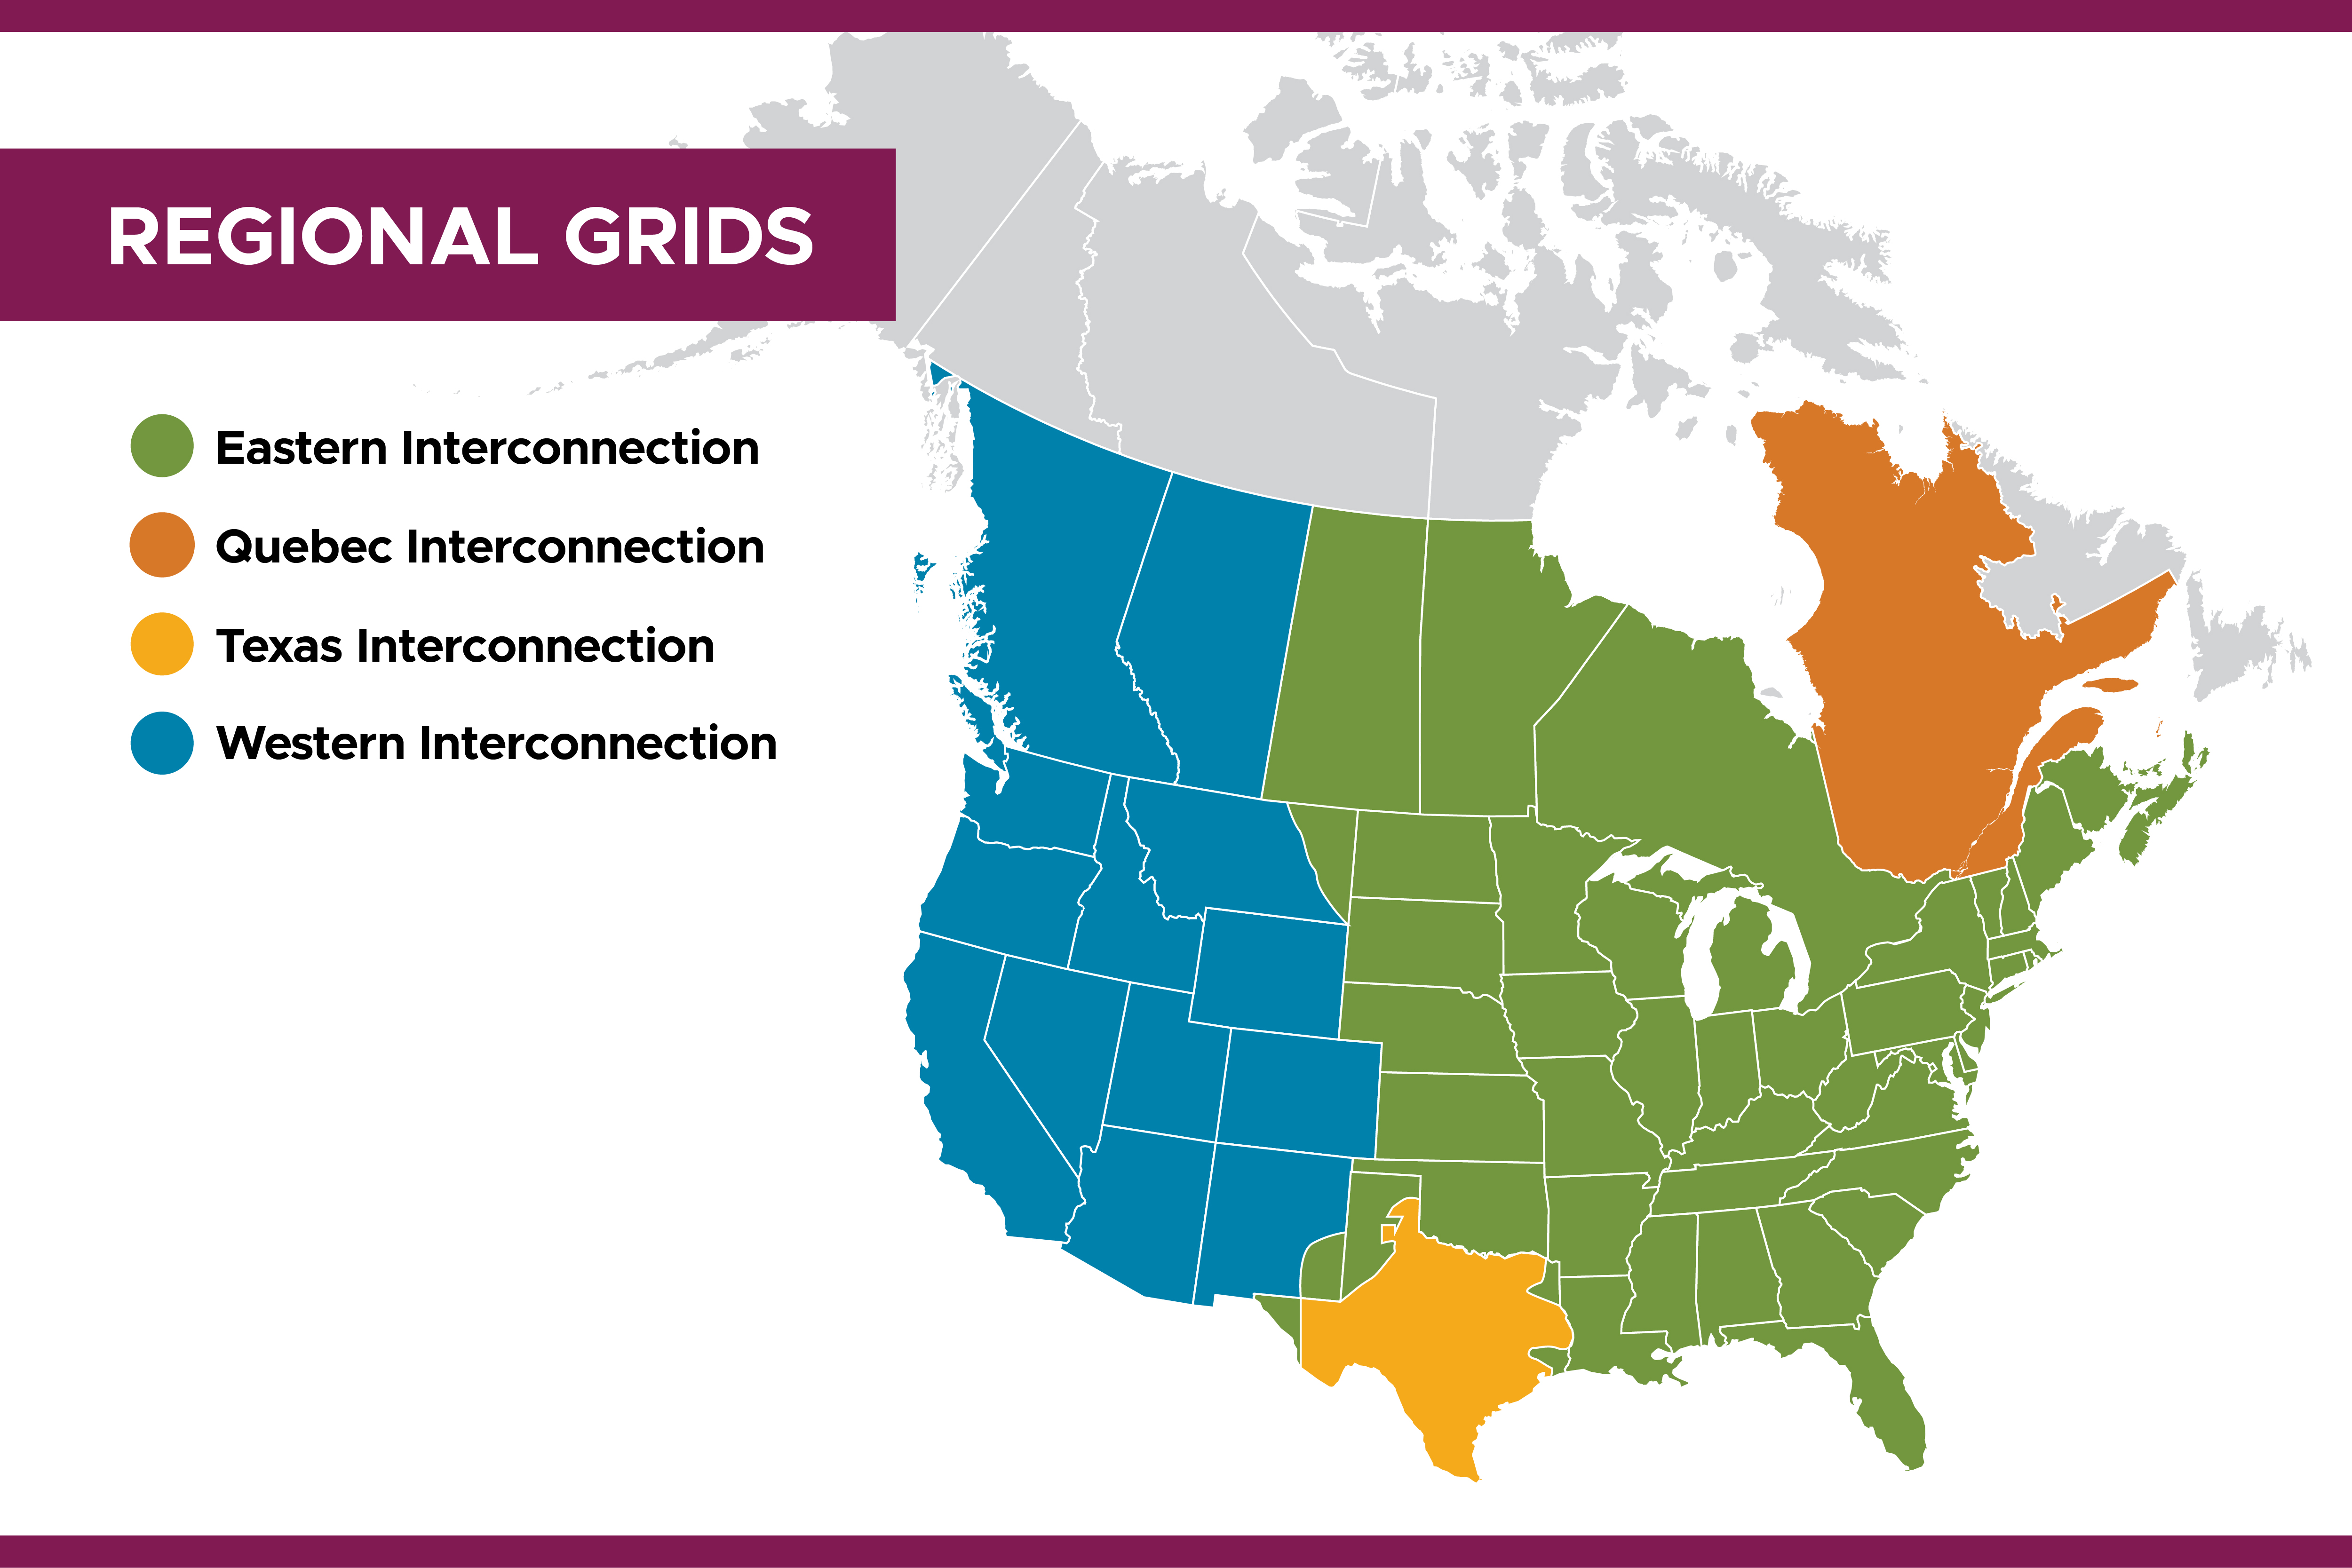 Image of the United States and boundaries for each regional grid